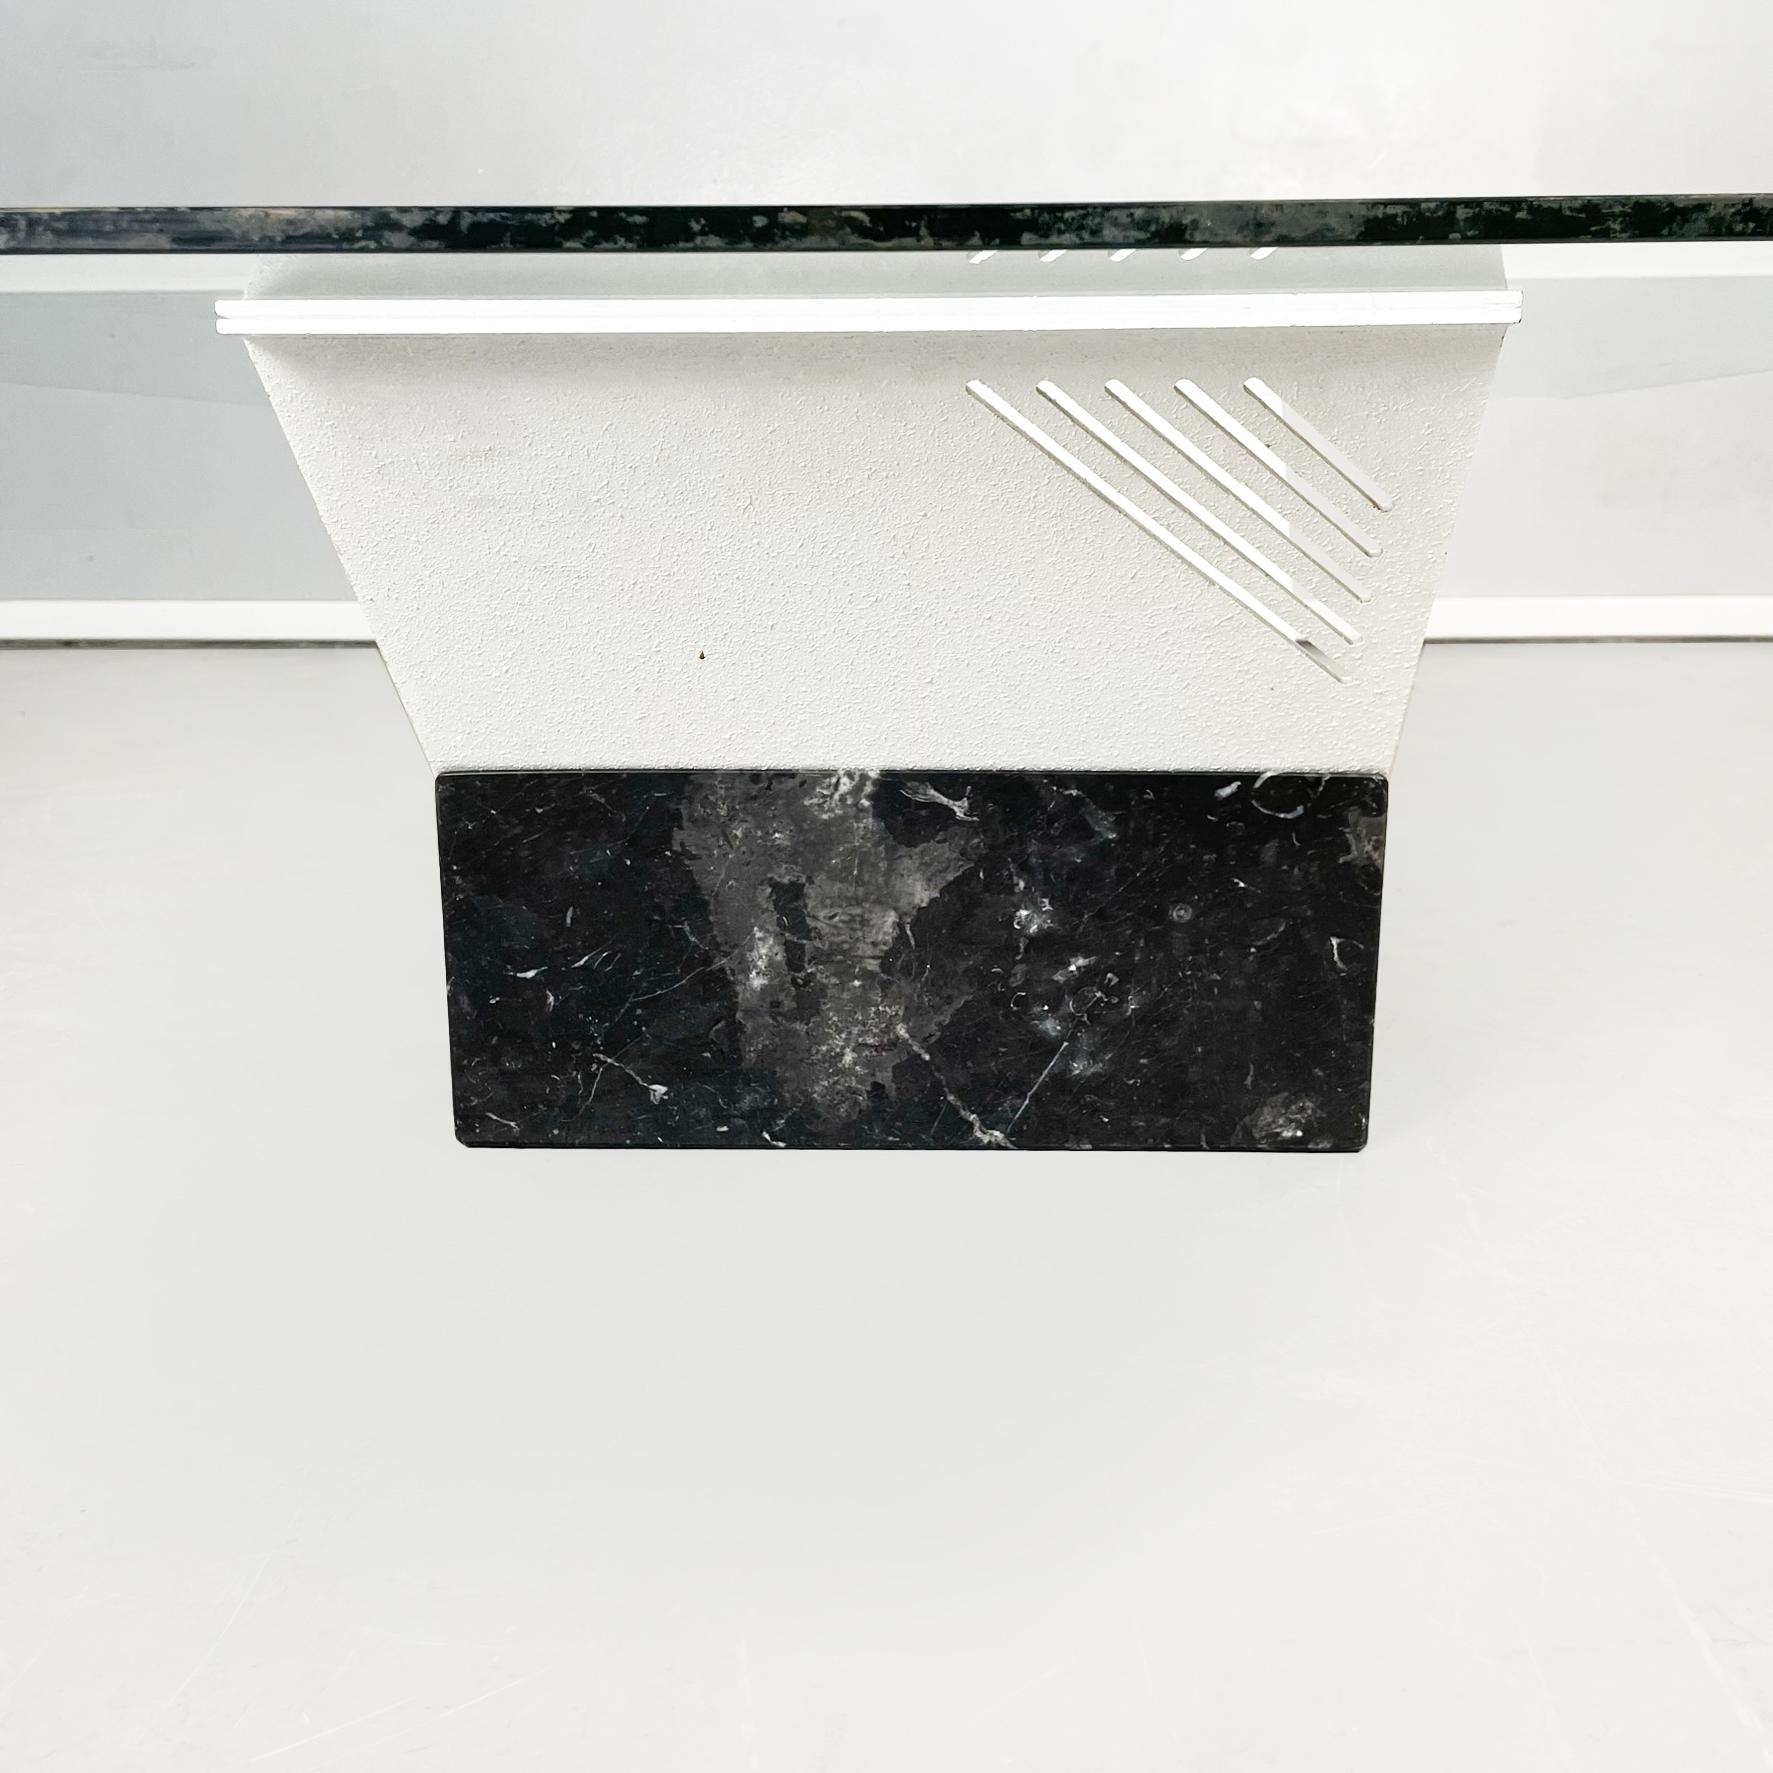 Italian Modern Coffee Table in Glass, White Metal, Black Marquinia Marble, 1980s For Sale 1